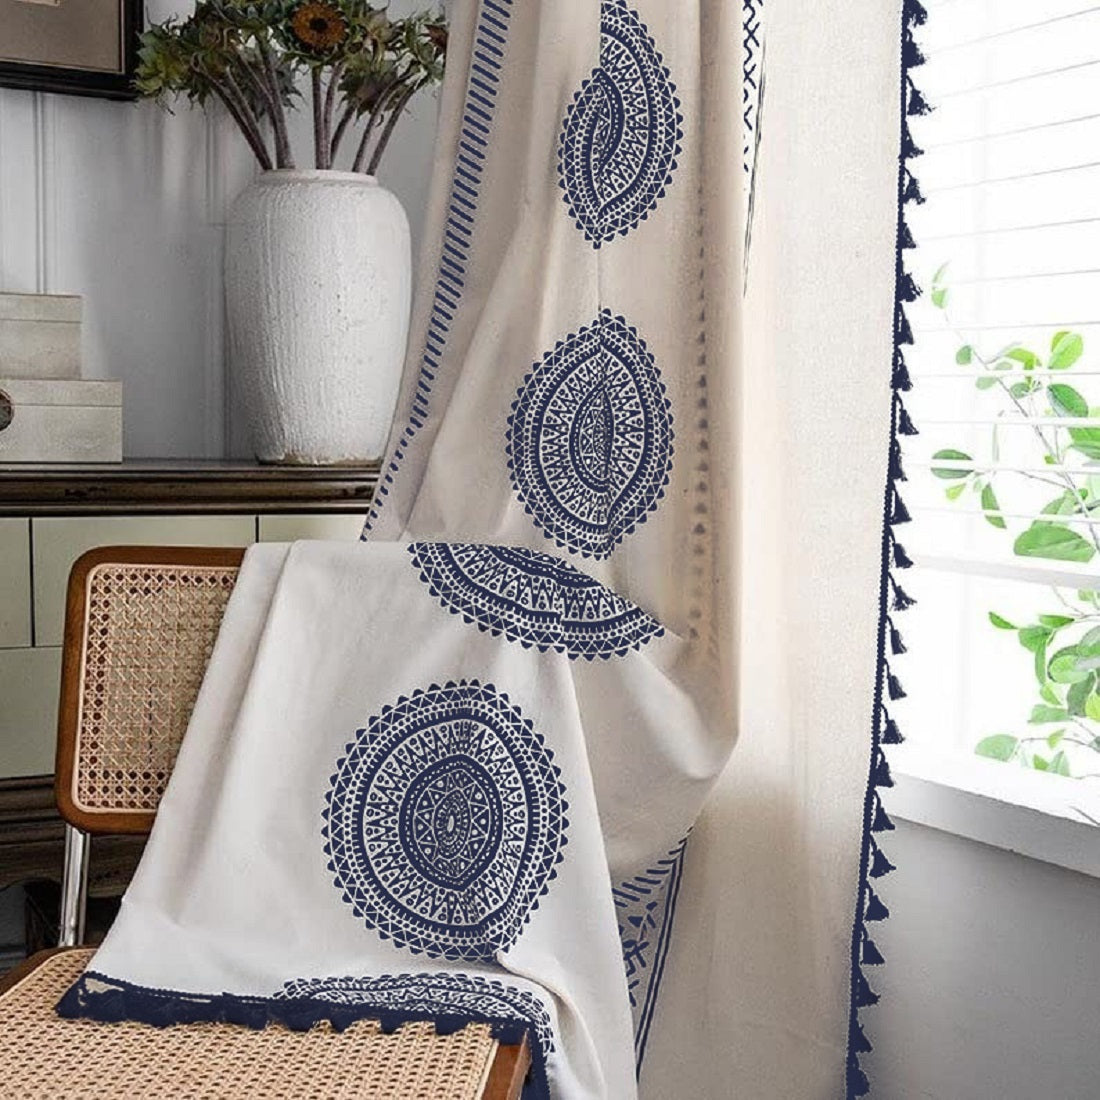 5 Sure Shot Reasons to Choose Customized Curtains for Your New Home